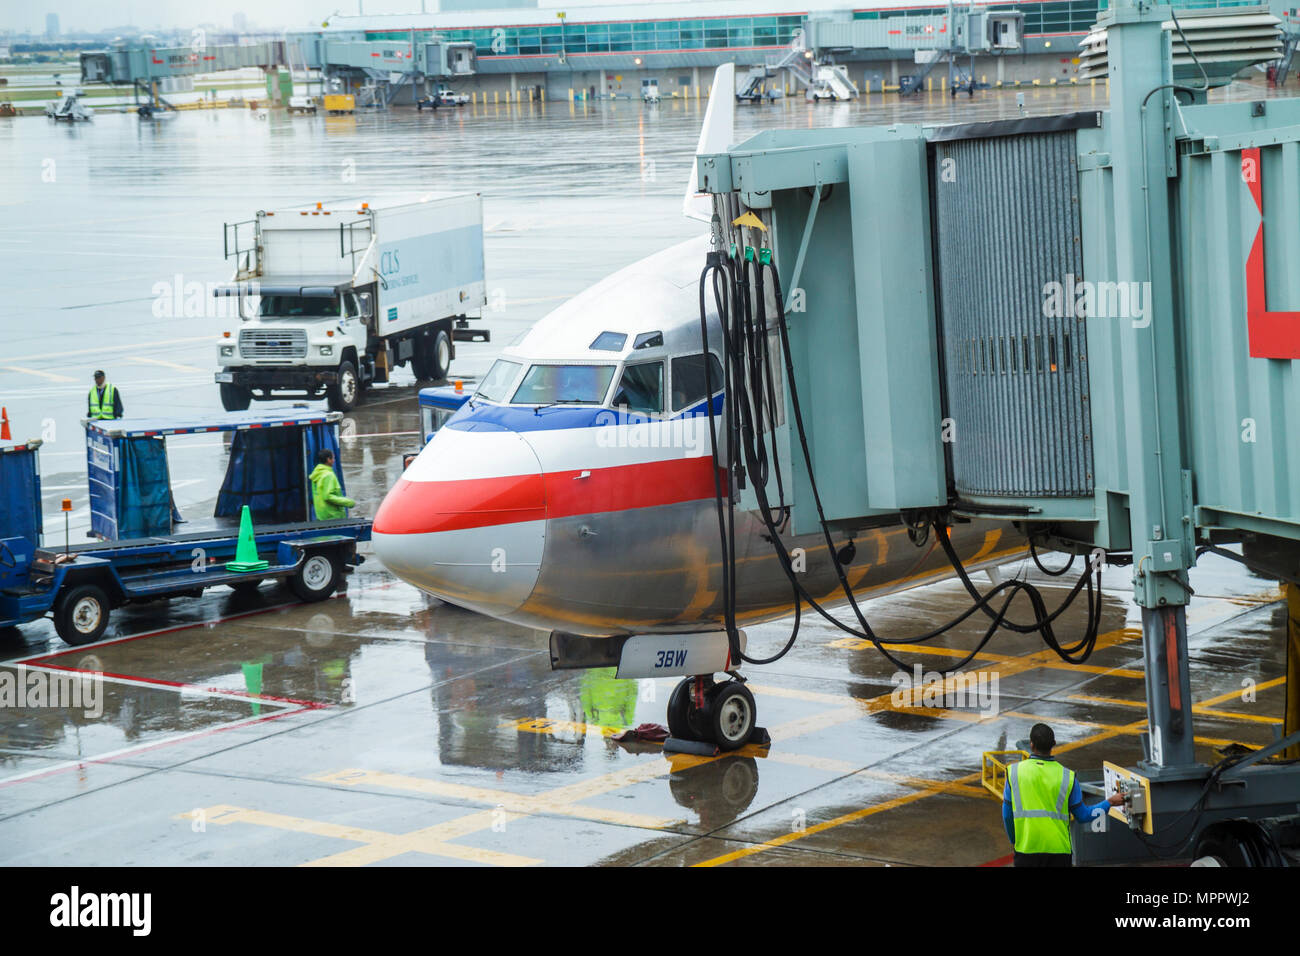 Toronto Canada,Lester B. Pearson International Airport,YYZ,terminal gate,company,US carrier,American Airlines,aircraft,tarmac,ground crew,window view, Stock Photo